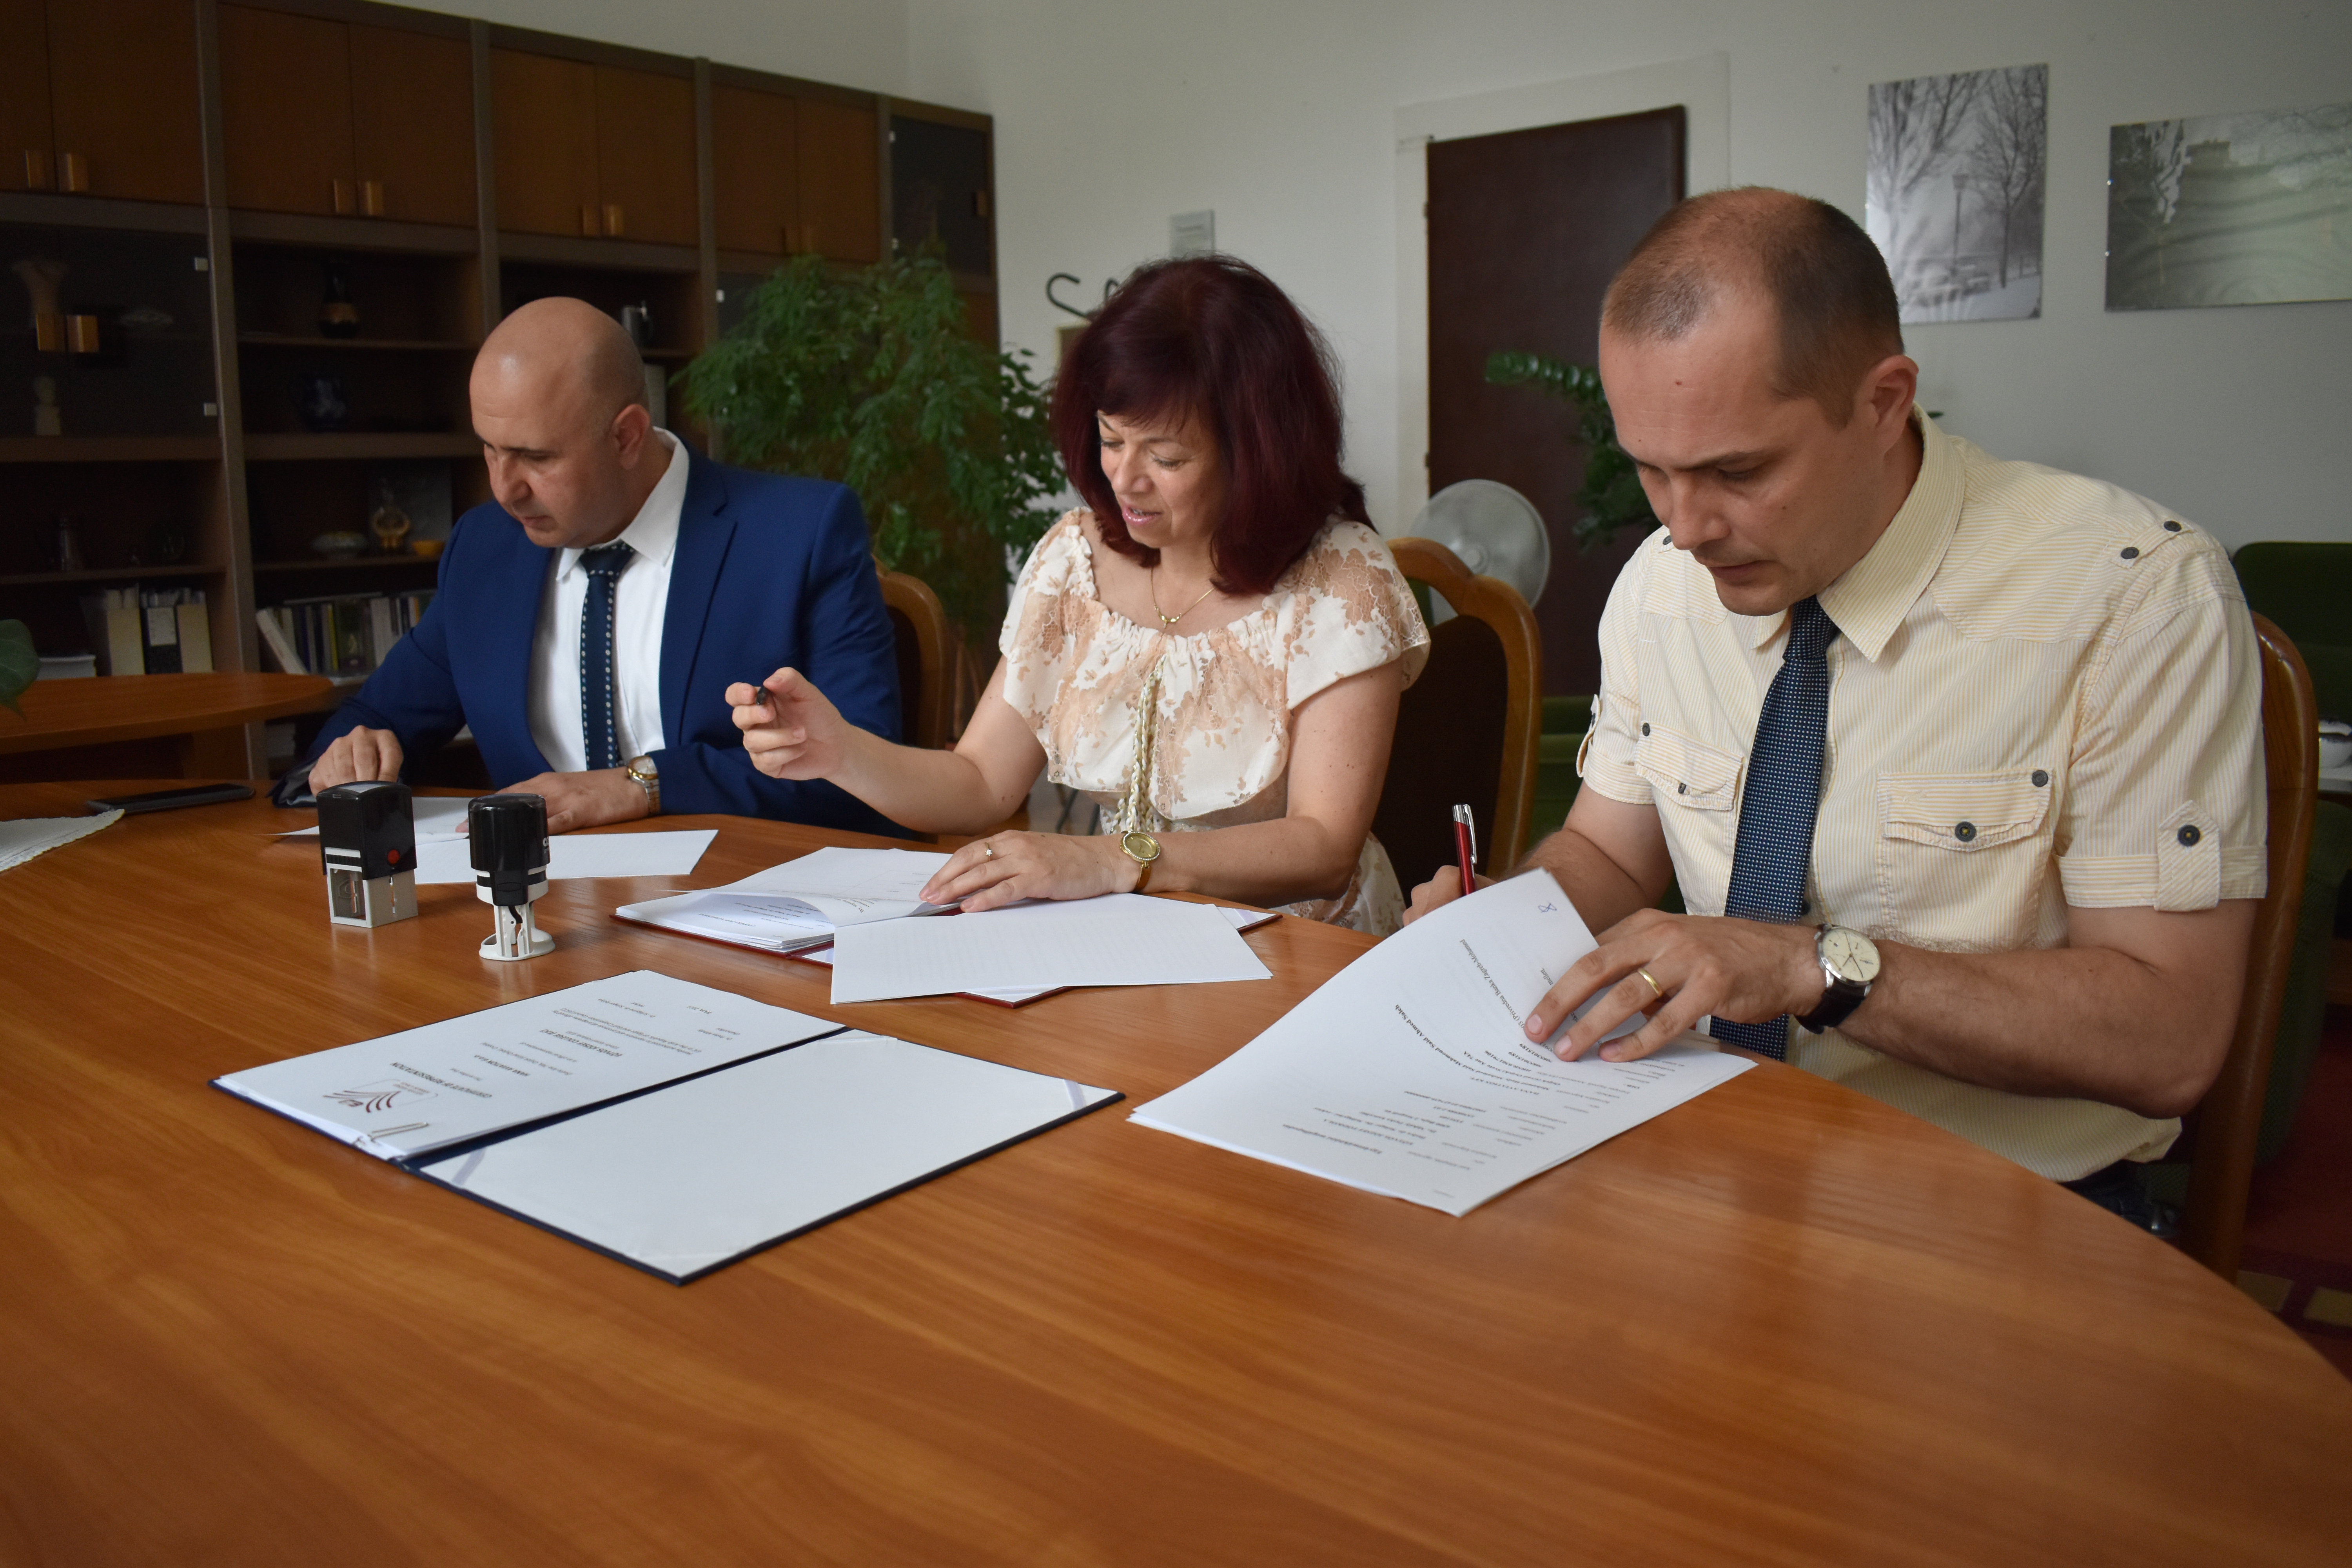 The joyful beginning of our cooperation, the moment of signing the contract.